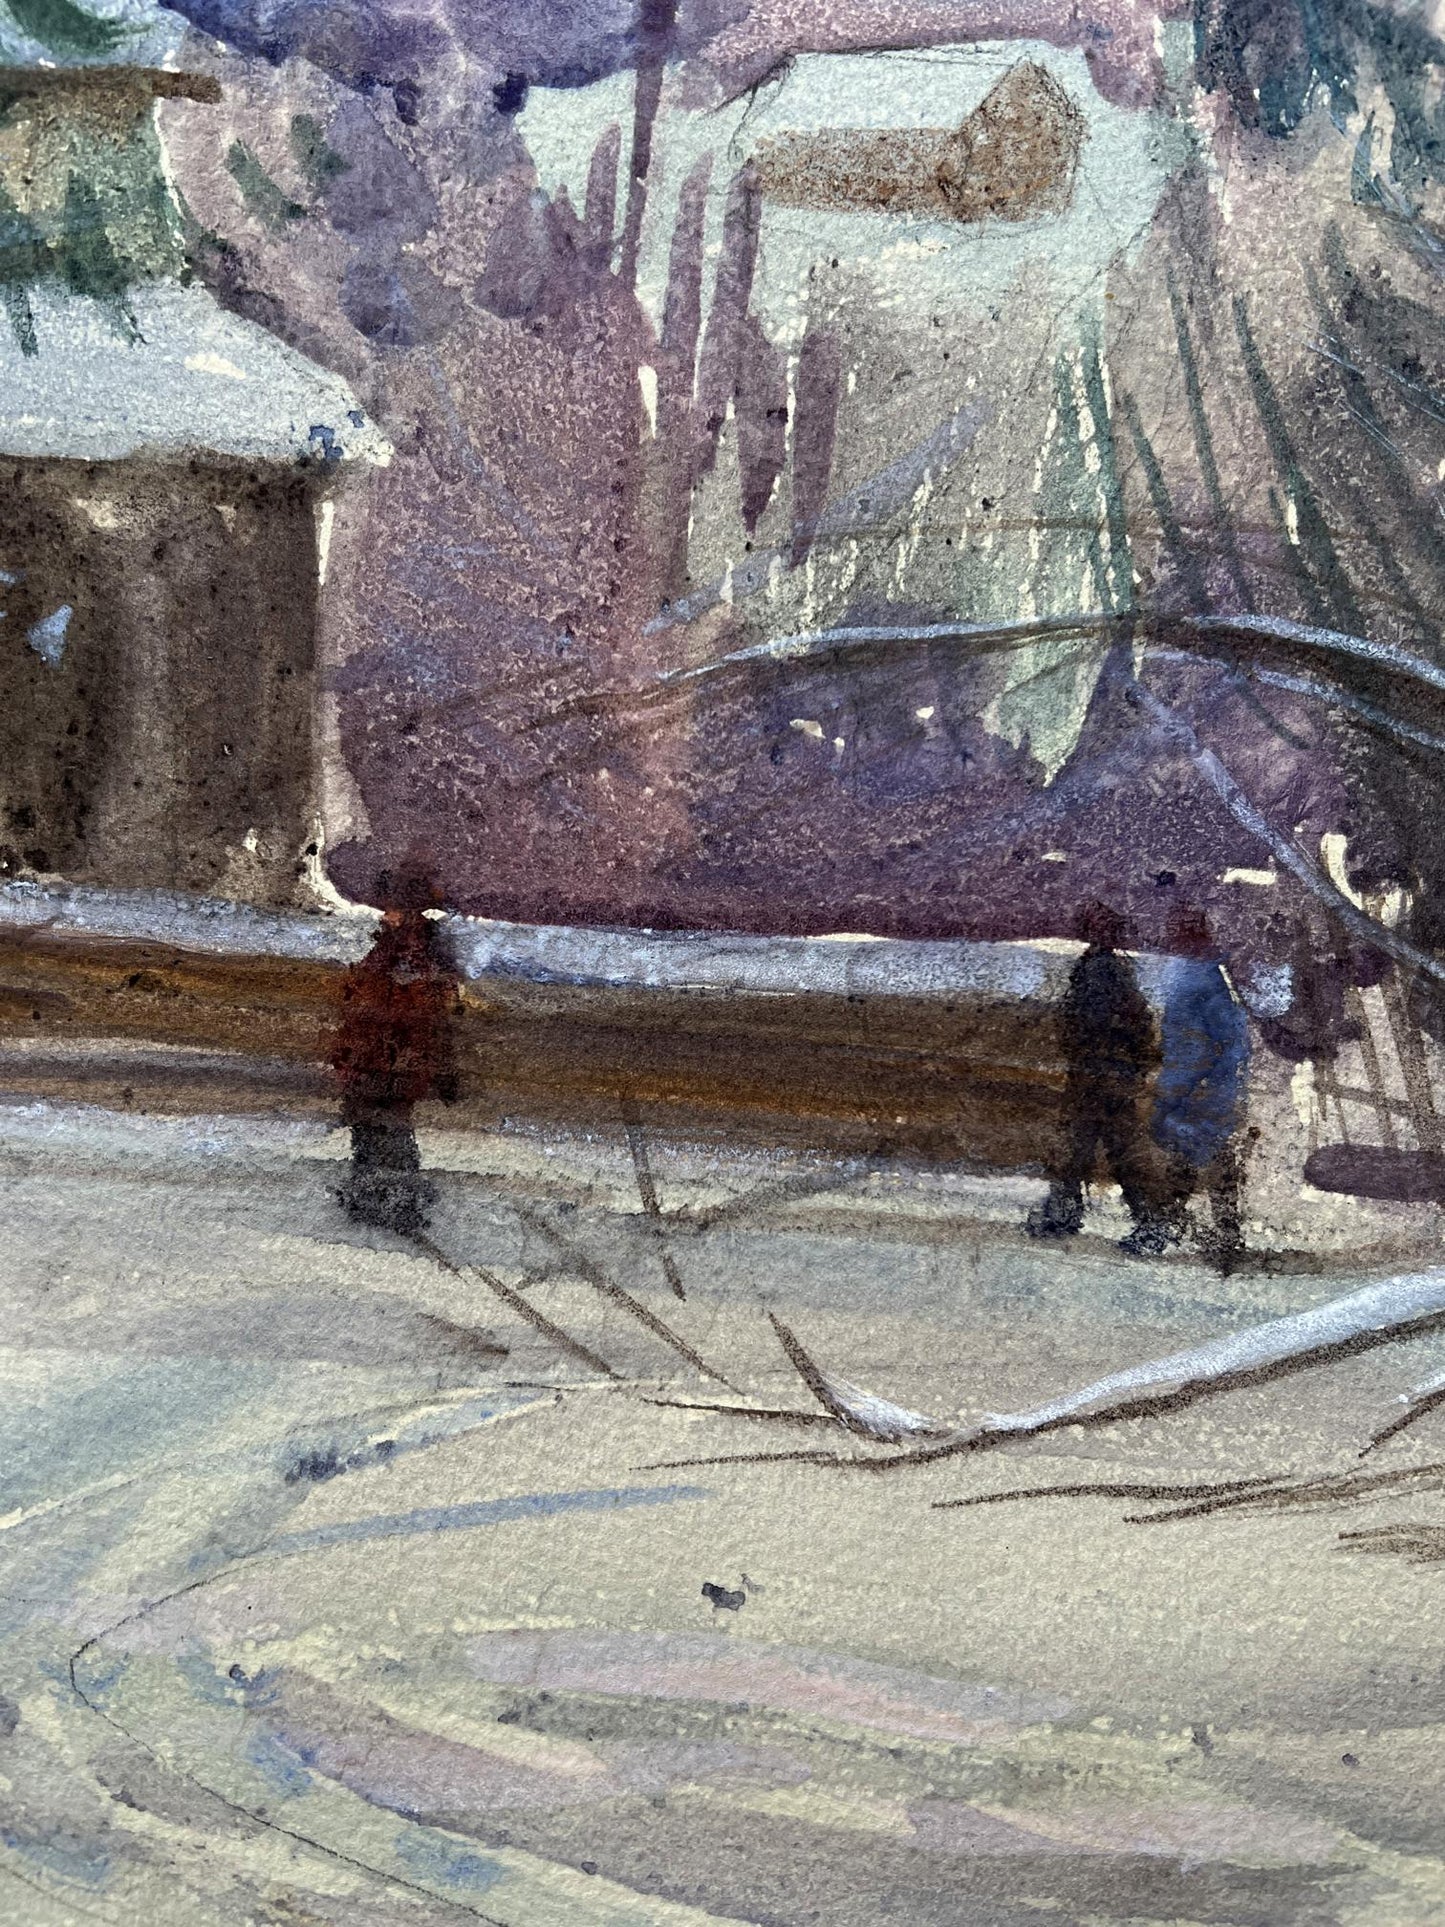 Watercolor painting In the cold V. Mishurovsky